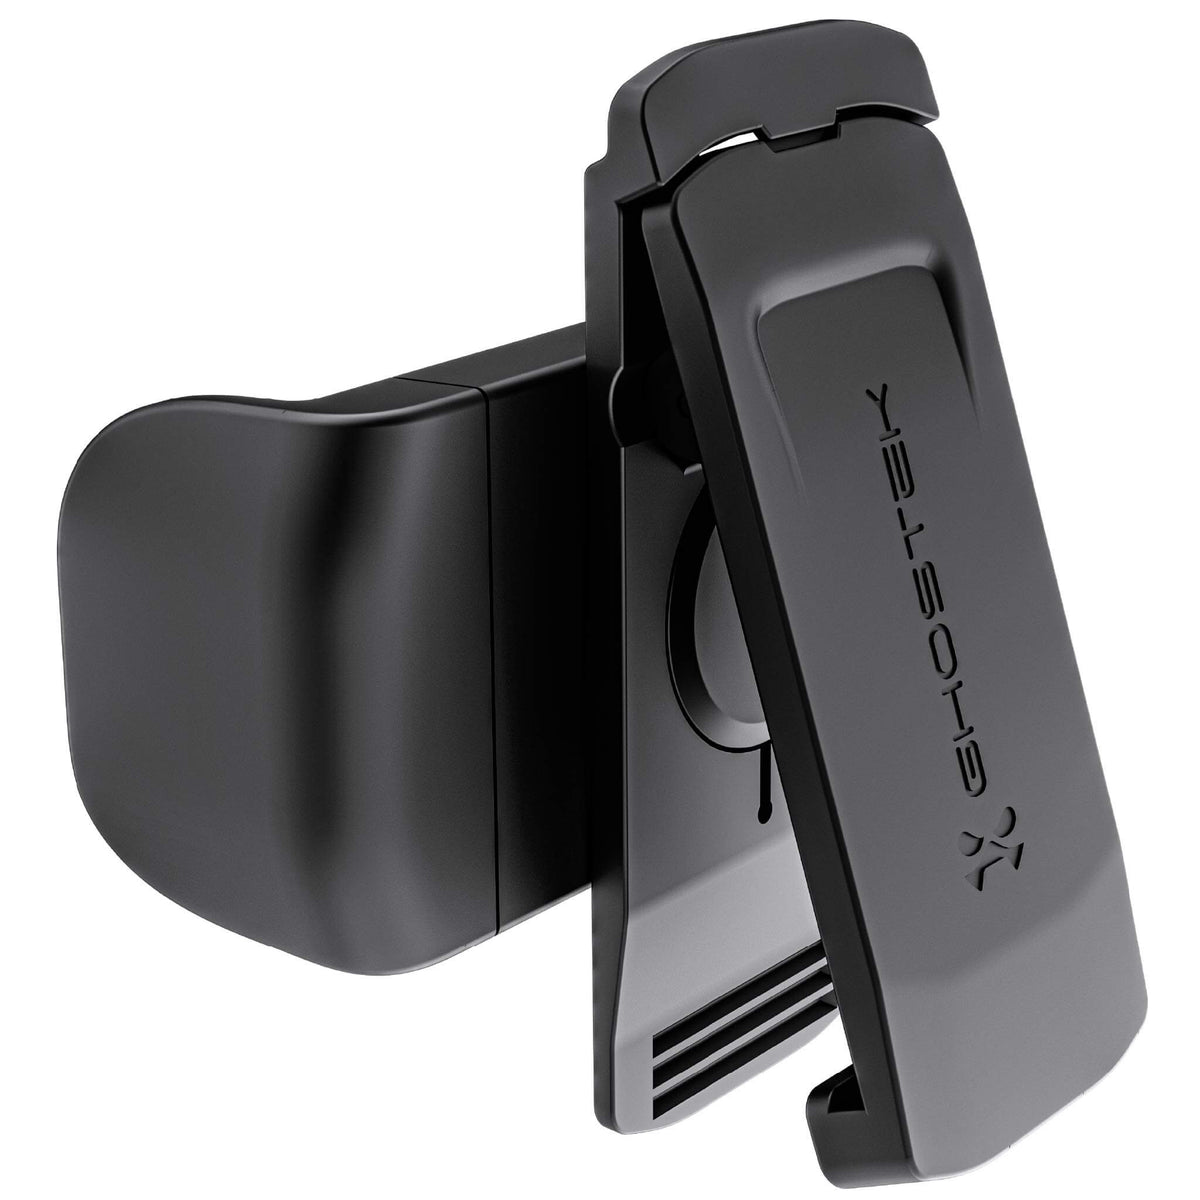 Ghostek Universal Holster with 360-Degree Swivel Belt Clip and Built-In Kickstand Designed to Fit Any Phone or Case Up to 3.7-in